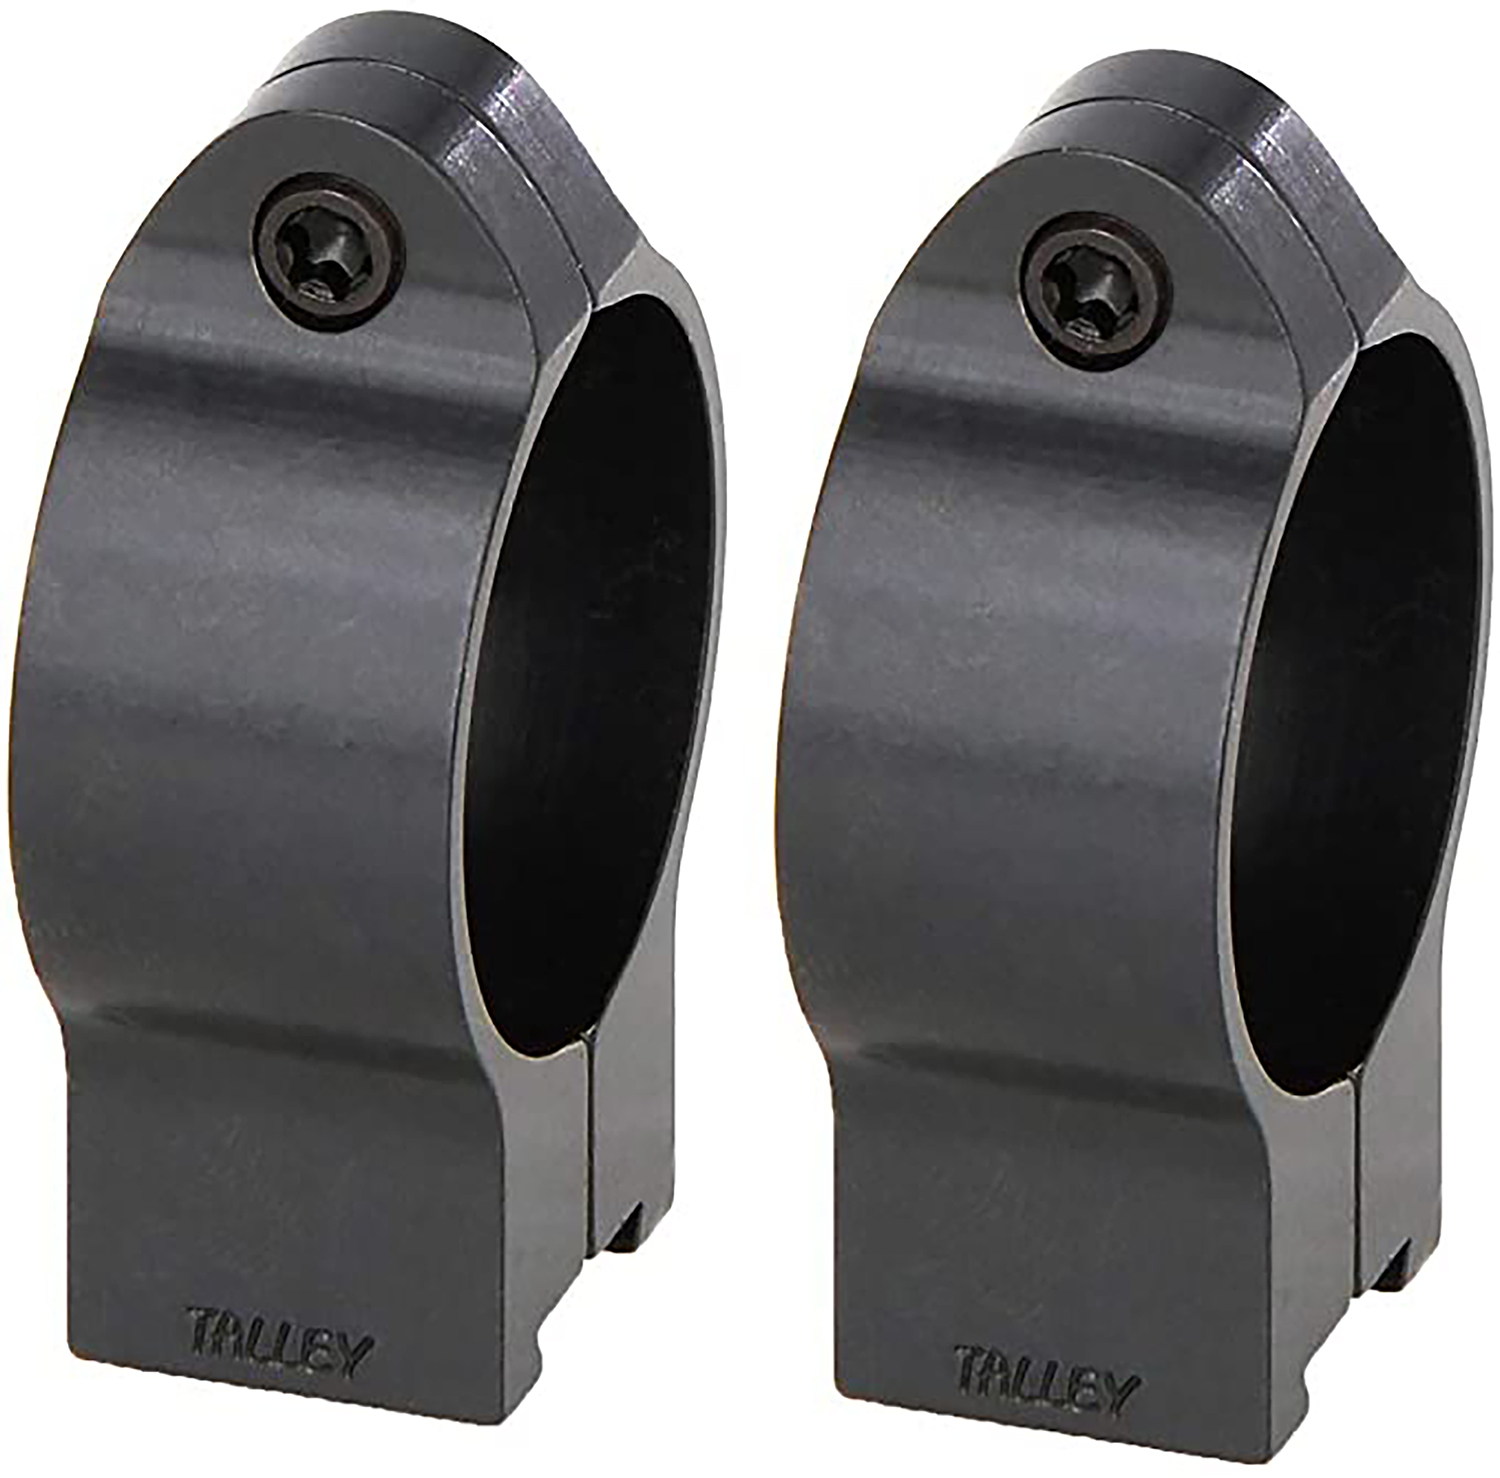 TALLEY RINGS HIGH 30MM CZ 452, 455,512,513 11MM DOVETAIL